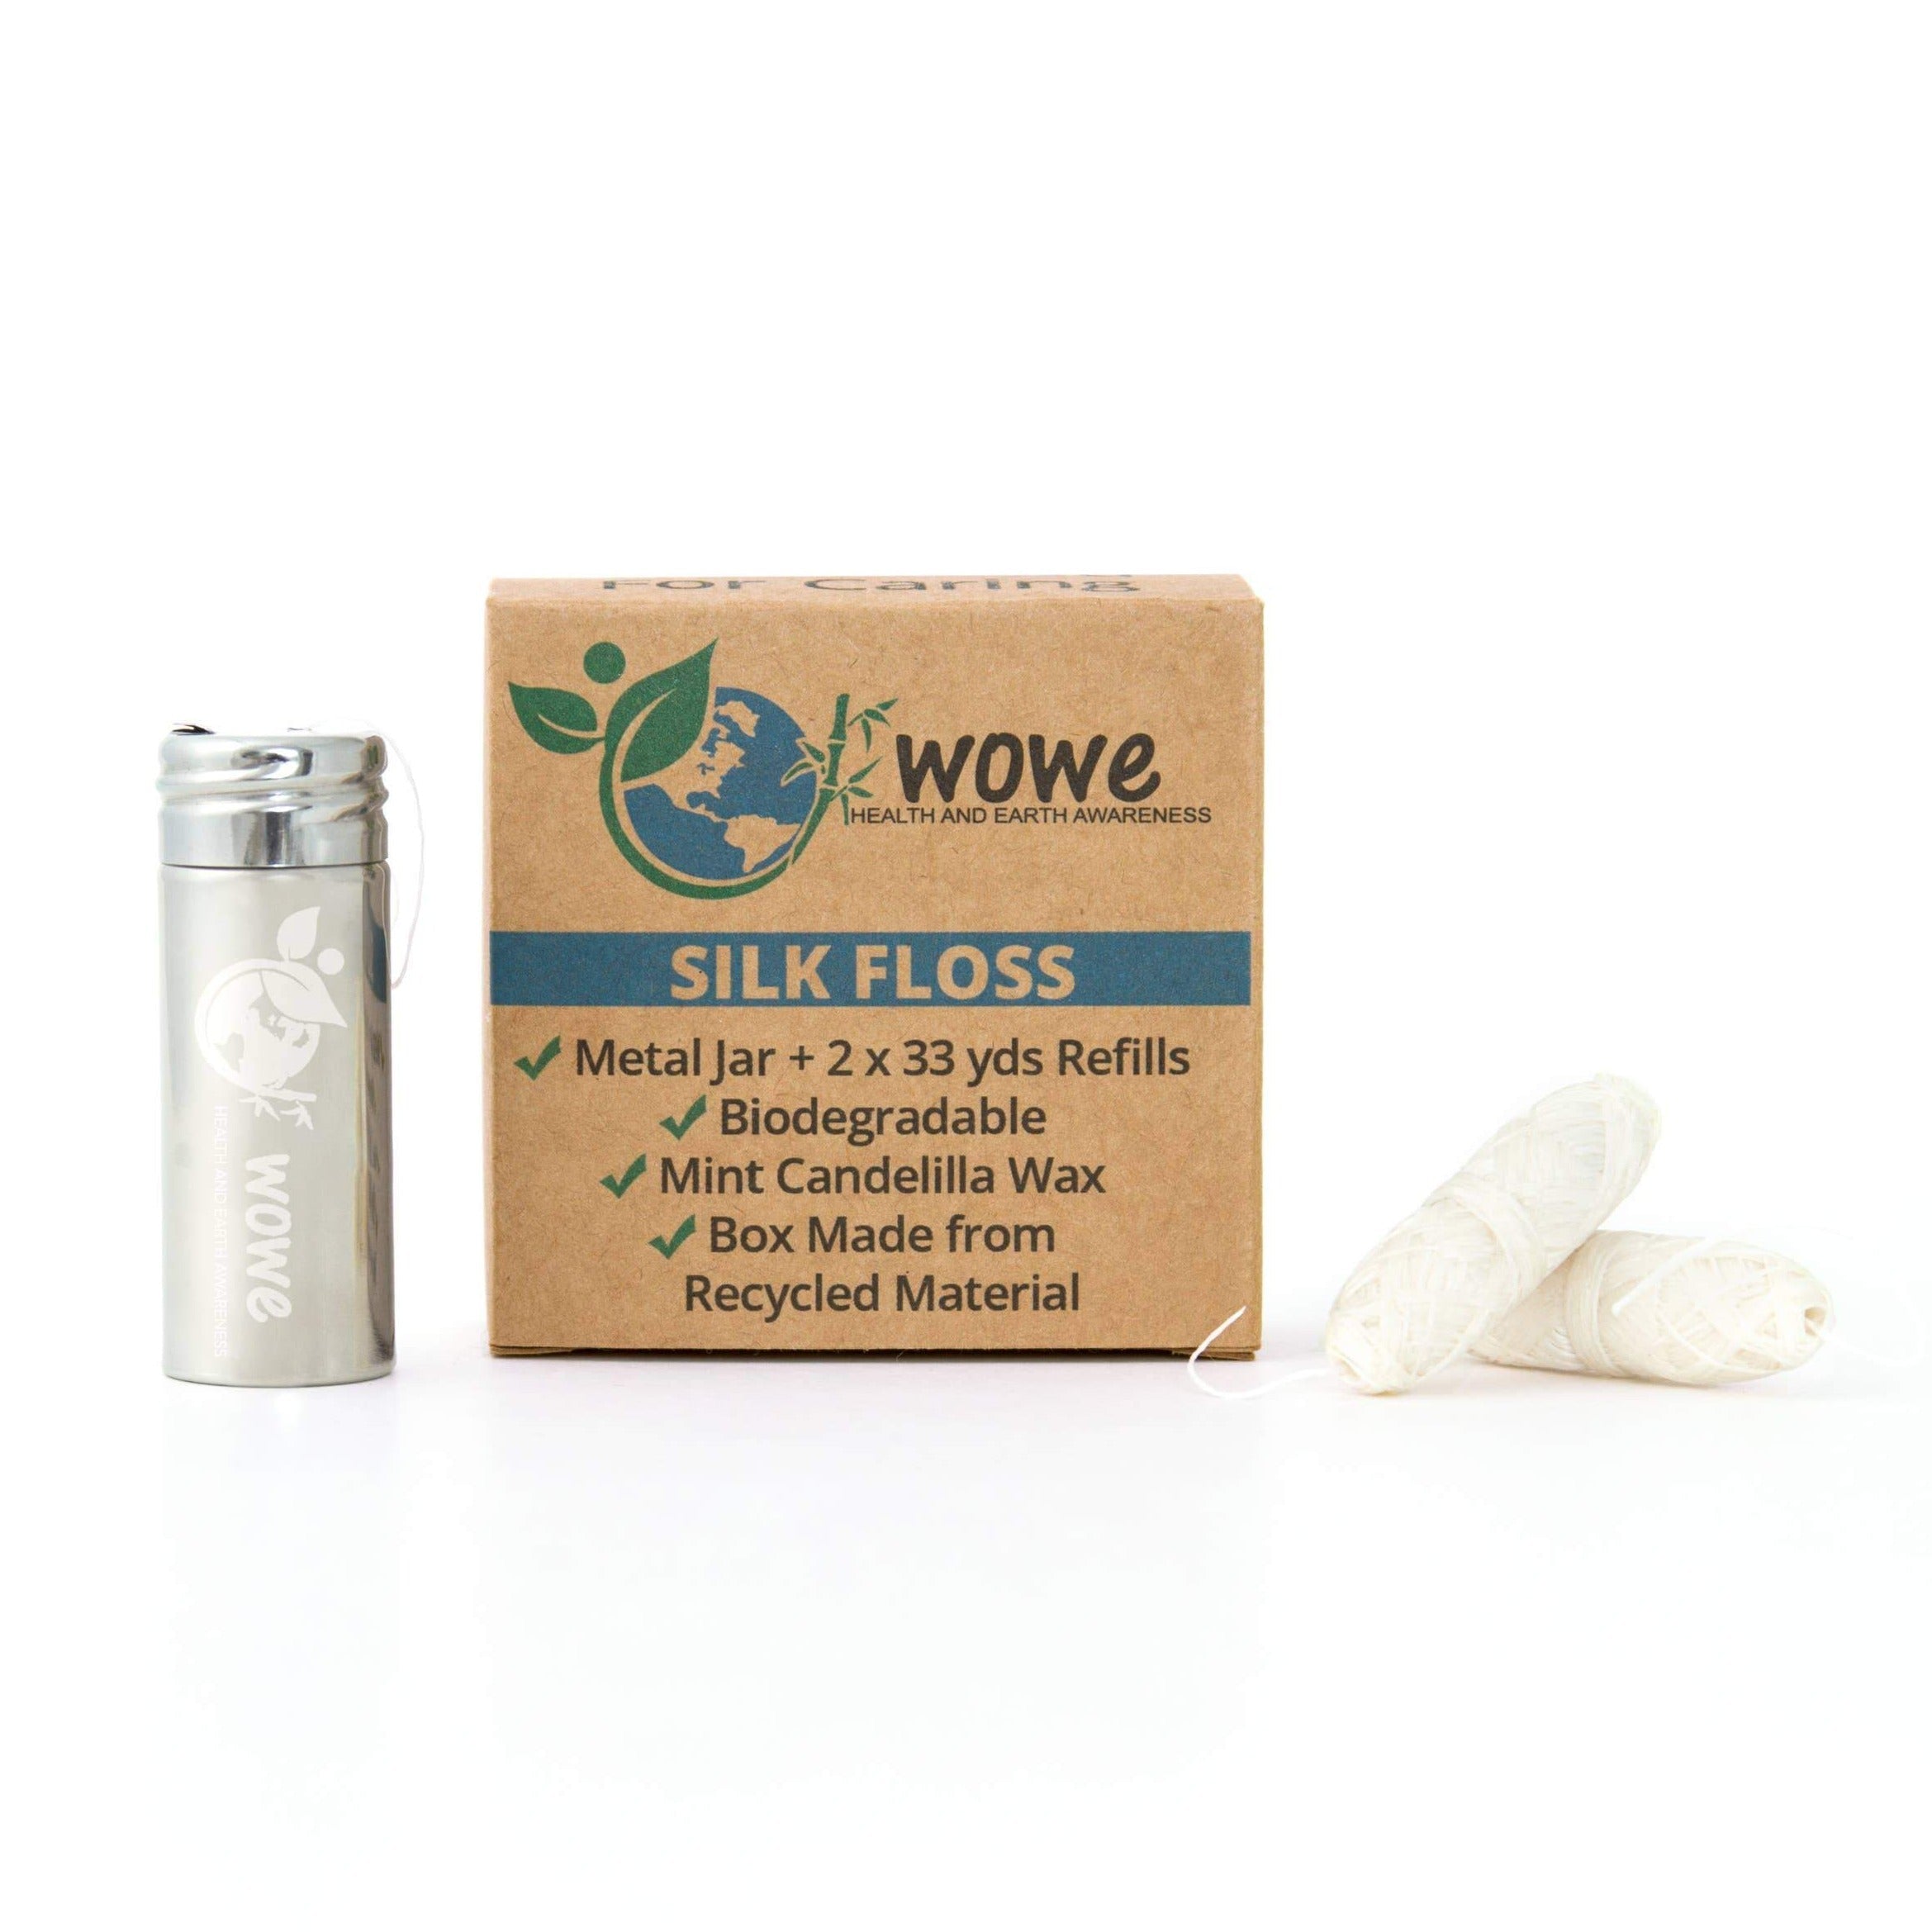 Wowe | Mint Flavored Natural Silk Dental Floss With Refillable Stainless Steel Container & 3 Refills - Natural Mint Flavor, Floss, Wowe, Defiance Outdoor Gear Co.